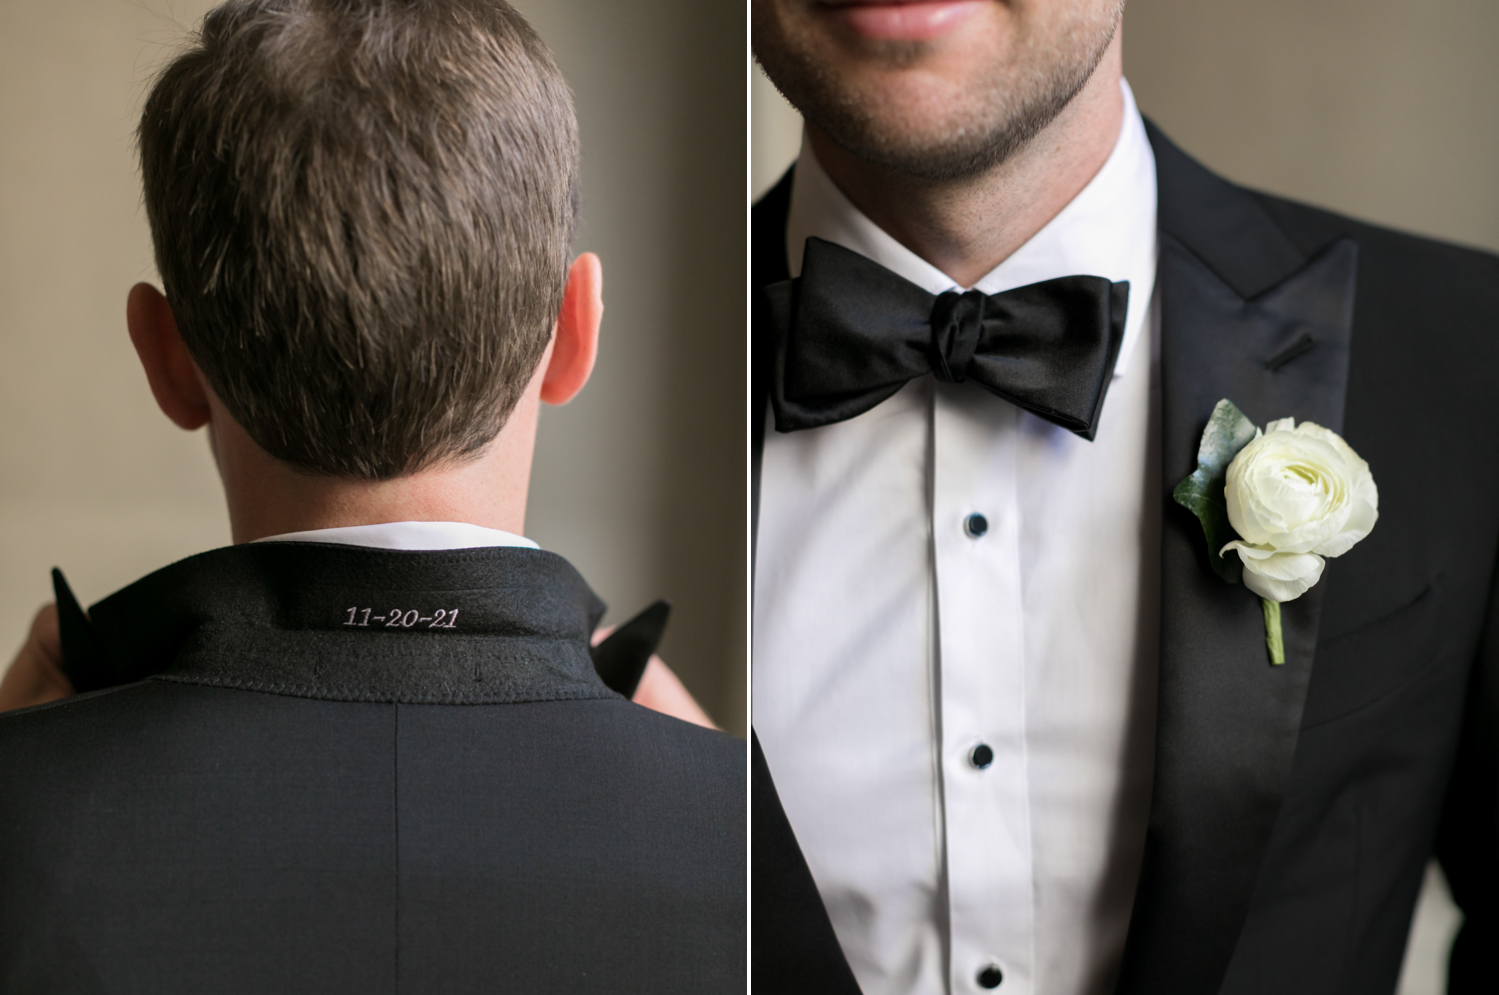 The groom shows off his custom suit collar with his wedding date sewed into it and his white boutonniere. 